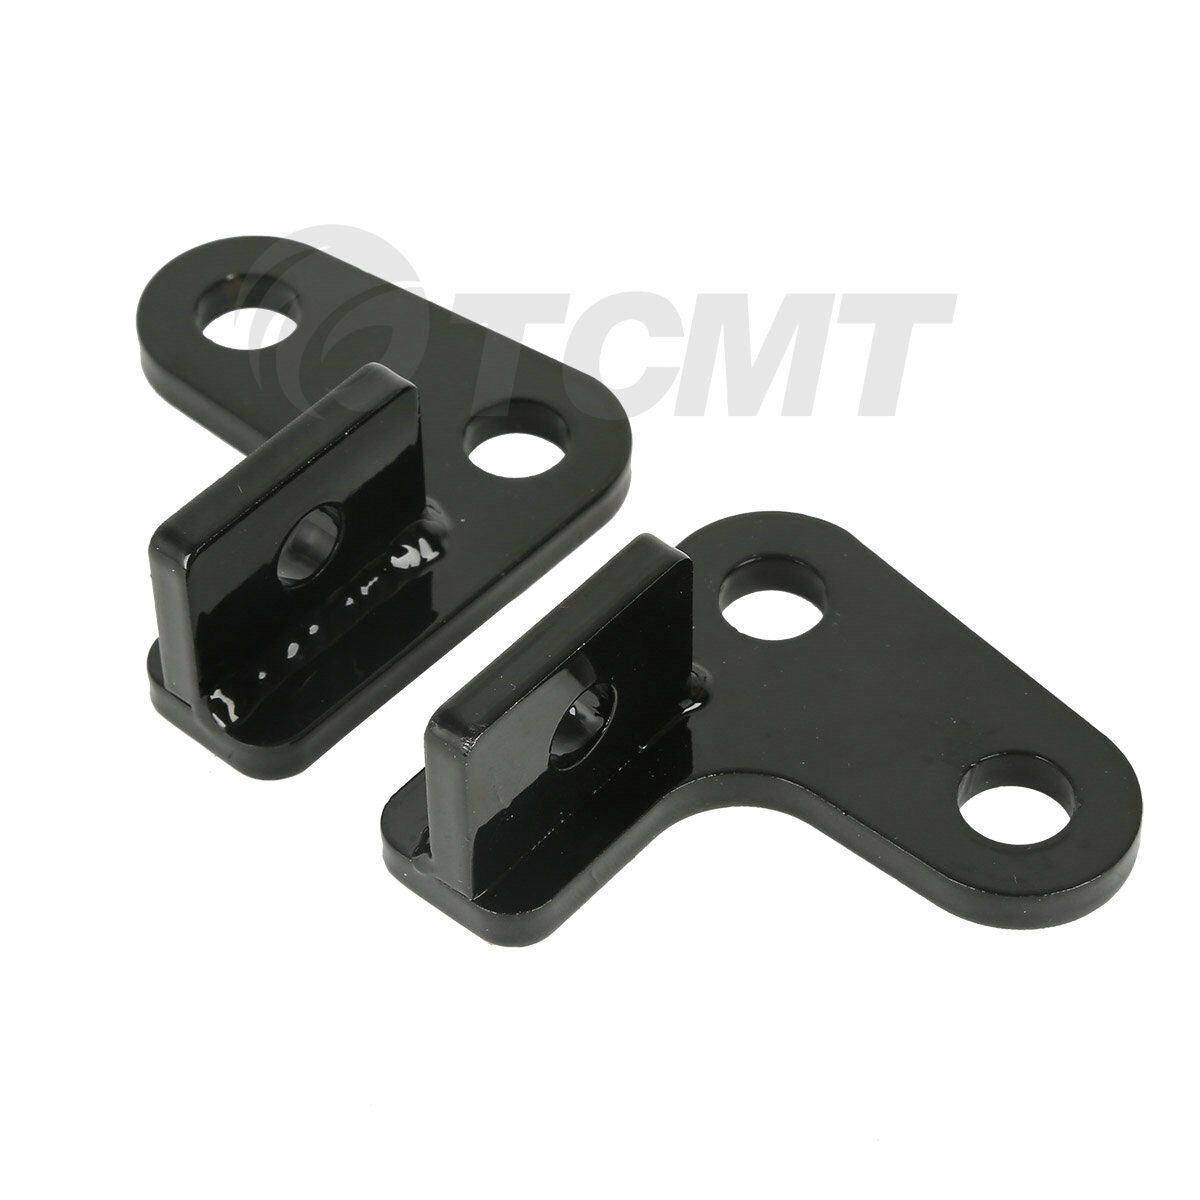 1" Black Rear Lowering Kit Fit For Harley Davidson Sportster 883 1200 1988-1999 - Moto Life Products